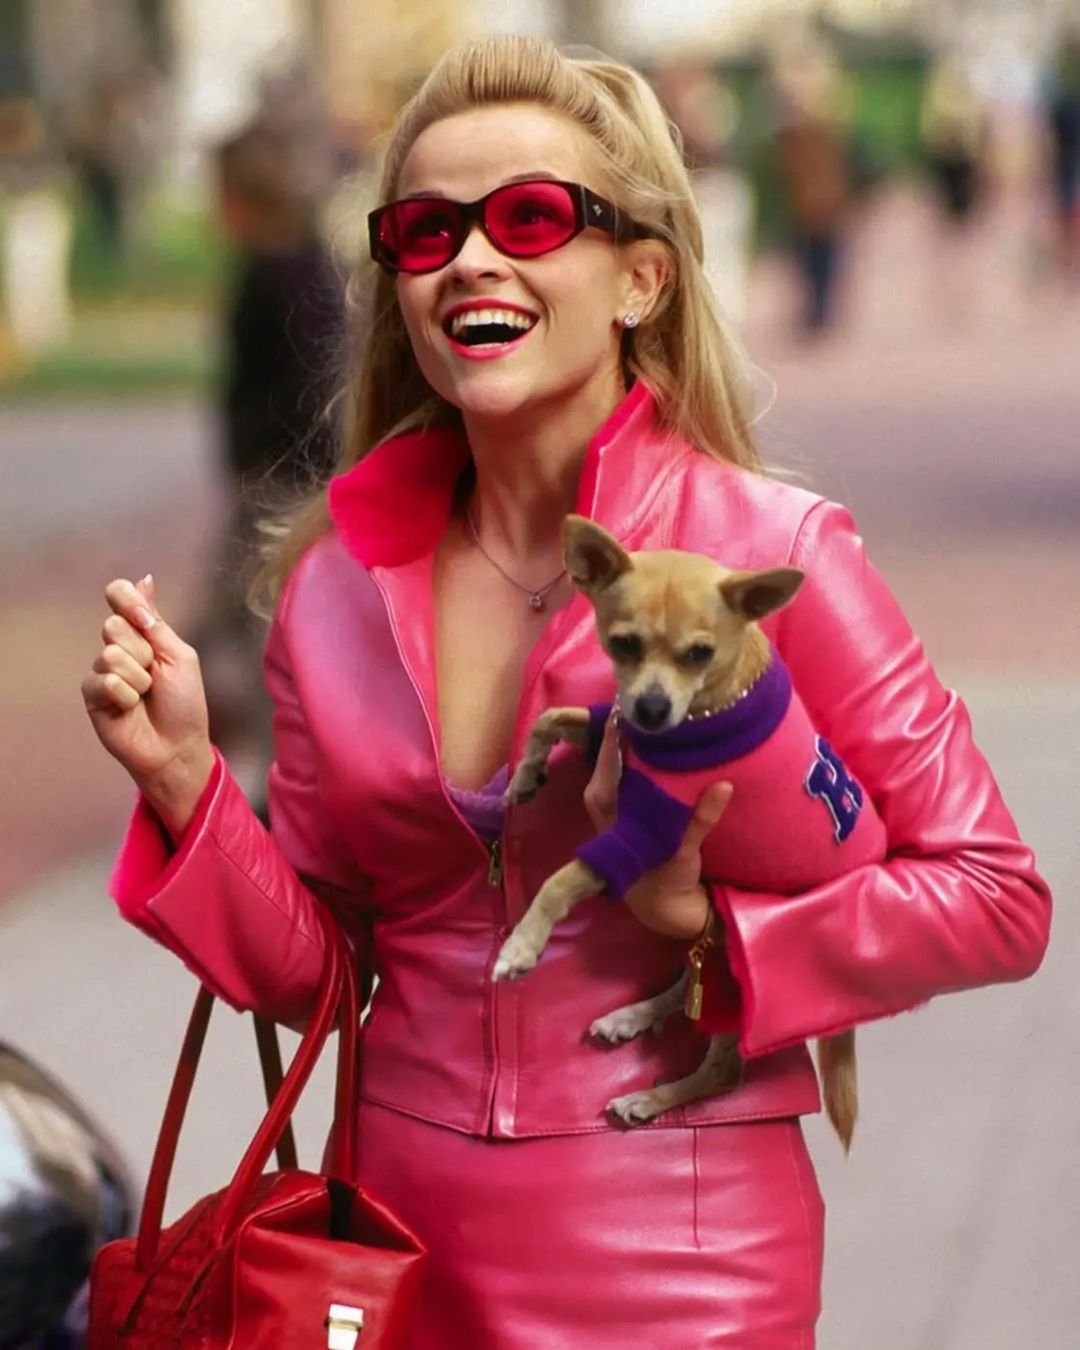 The prequel to Legally Blonde is coming Reese Witherspoon's most iconic character will star in a TV series